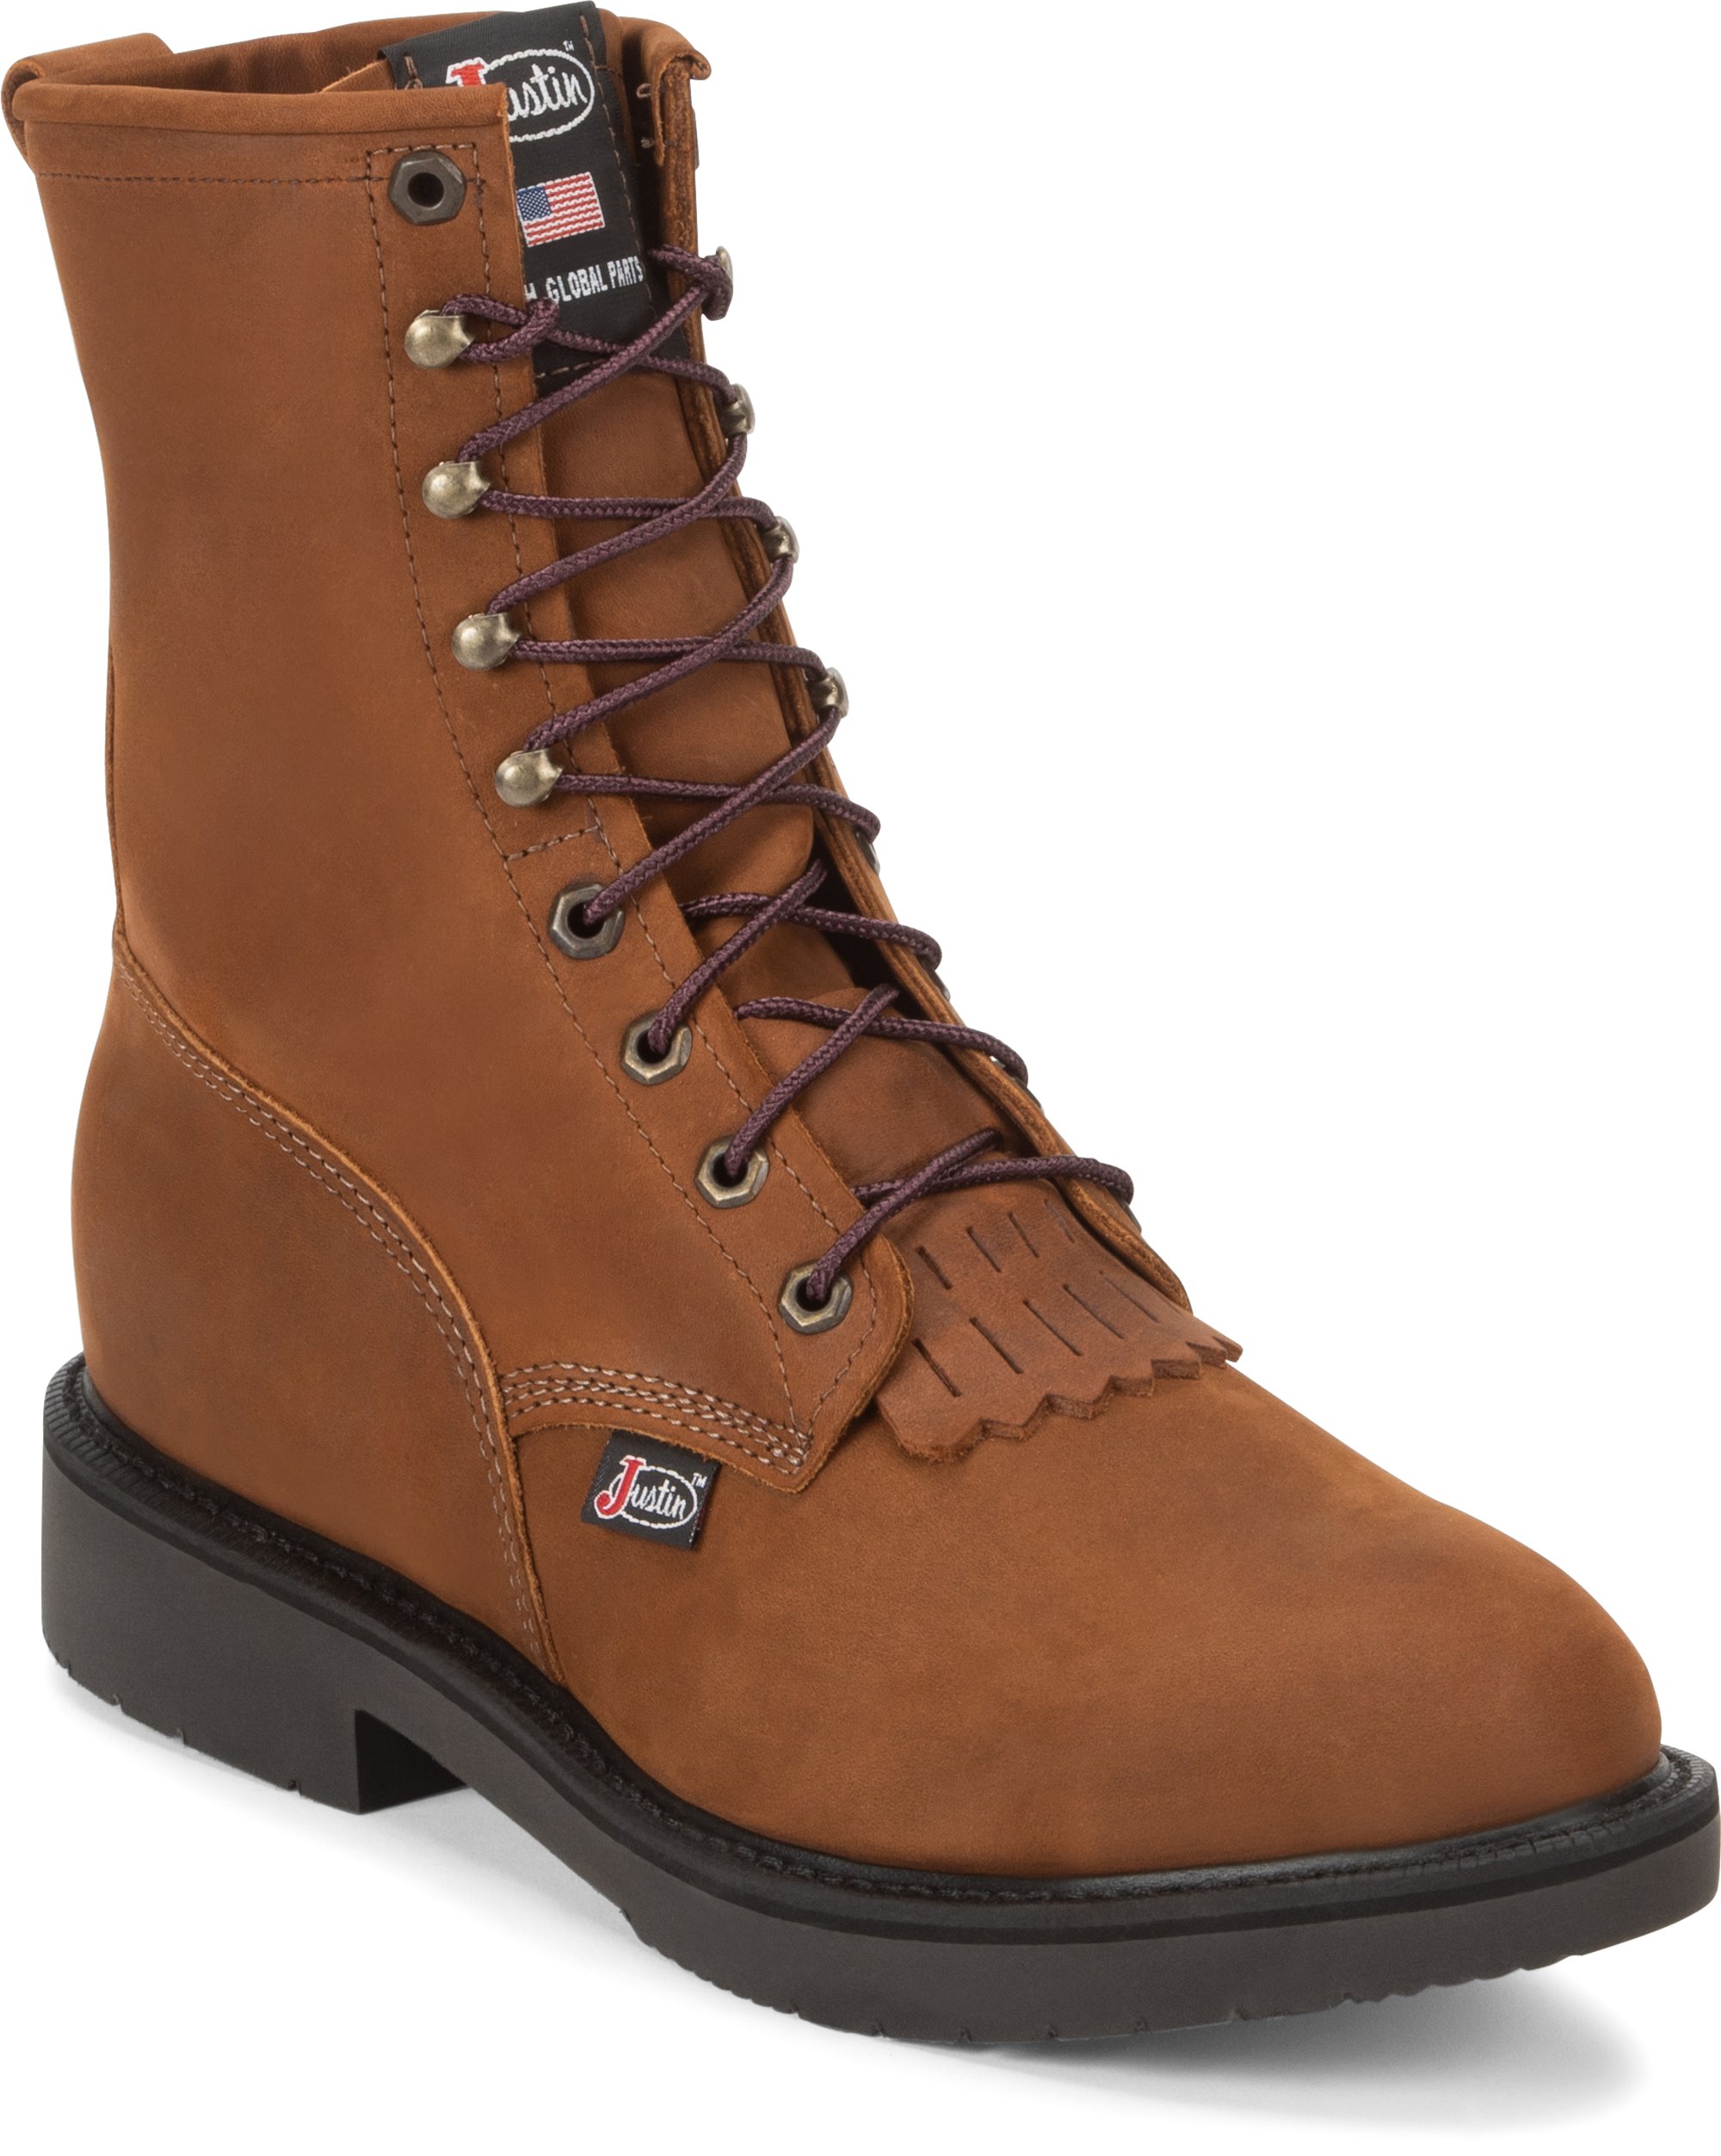 brown leather work boots